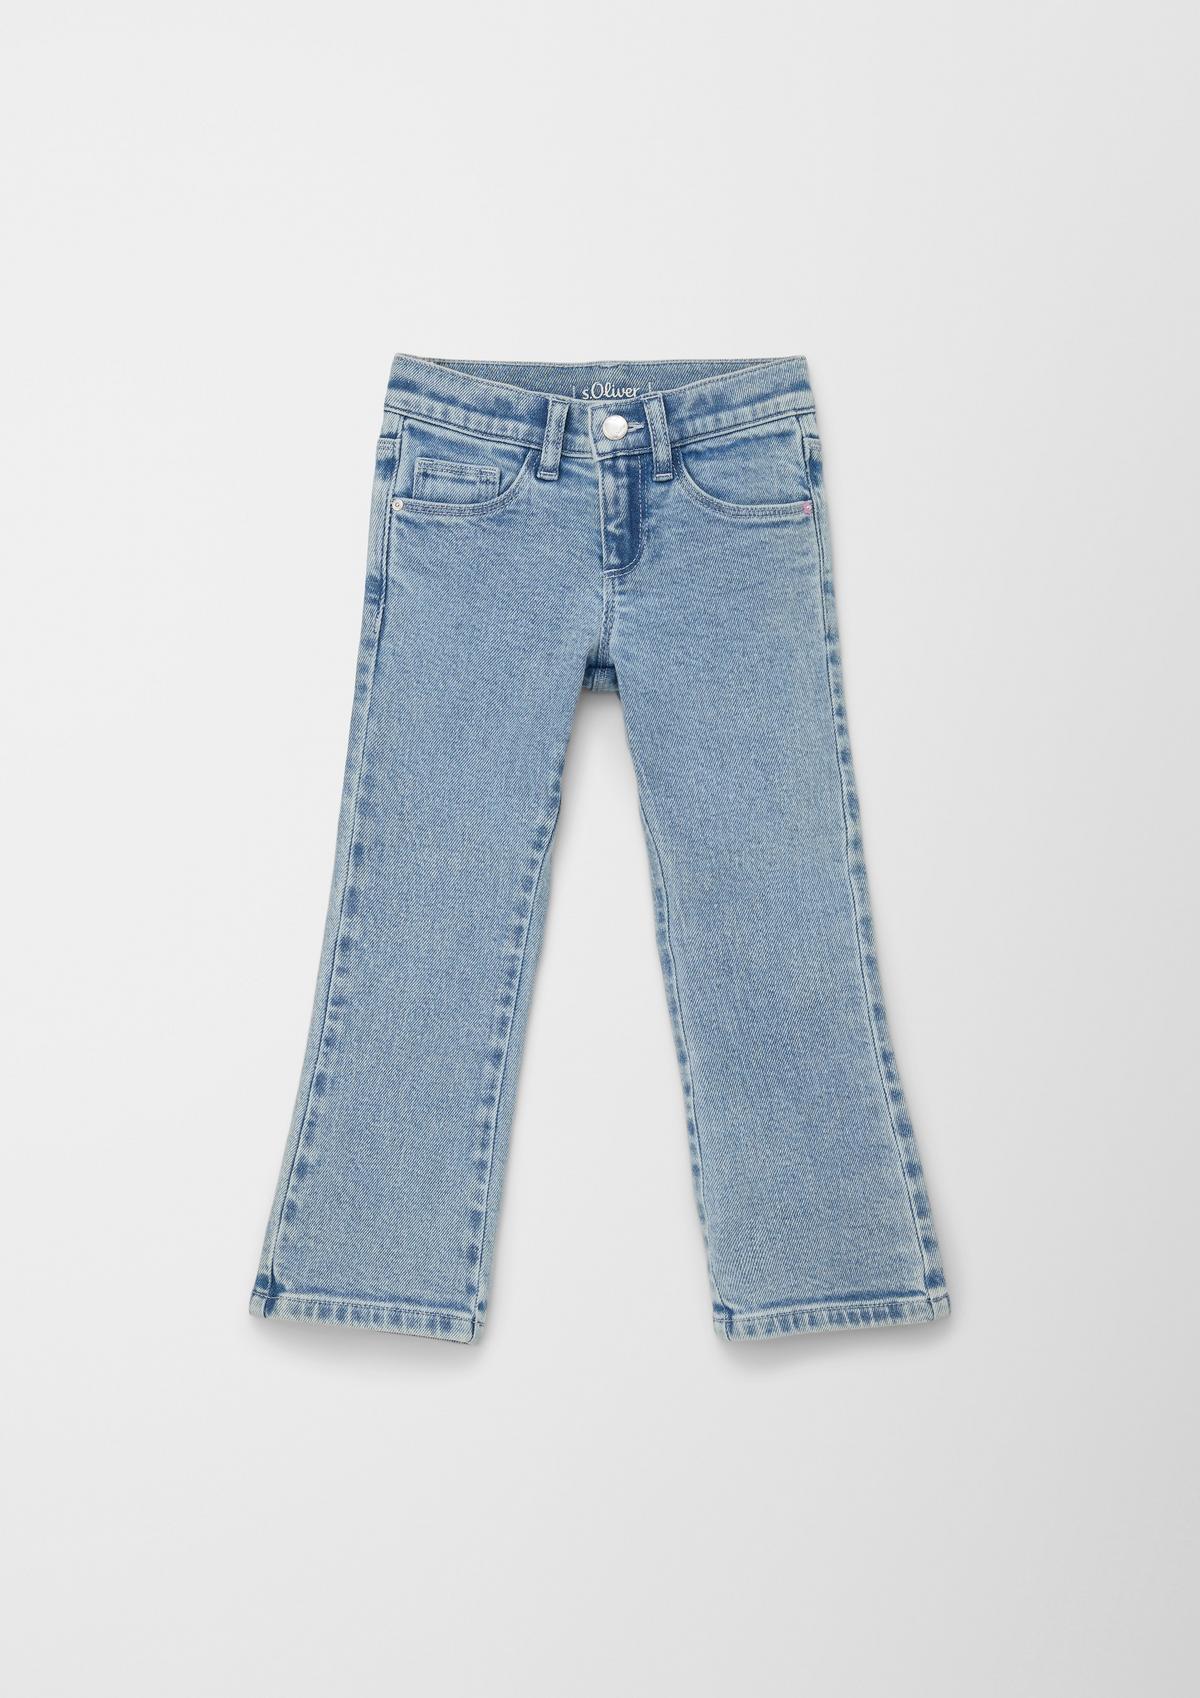 s.Oliver Jeans Betsy / regular fit / mid rise / flared leg